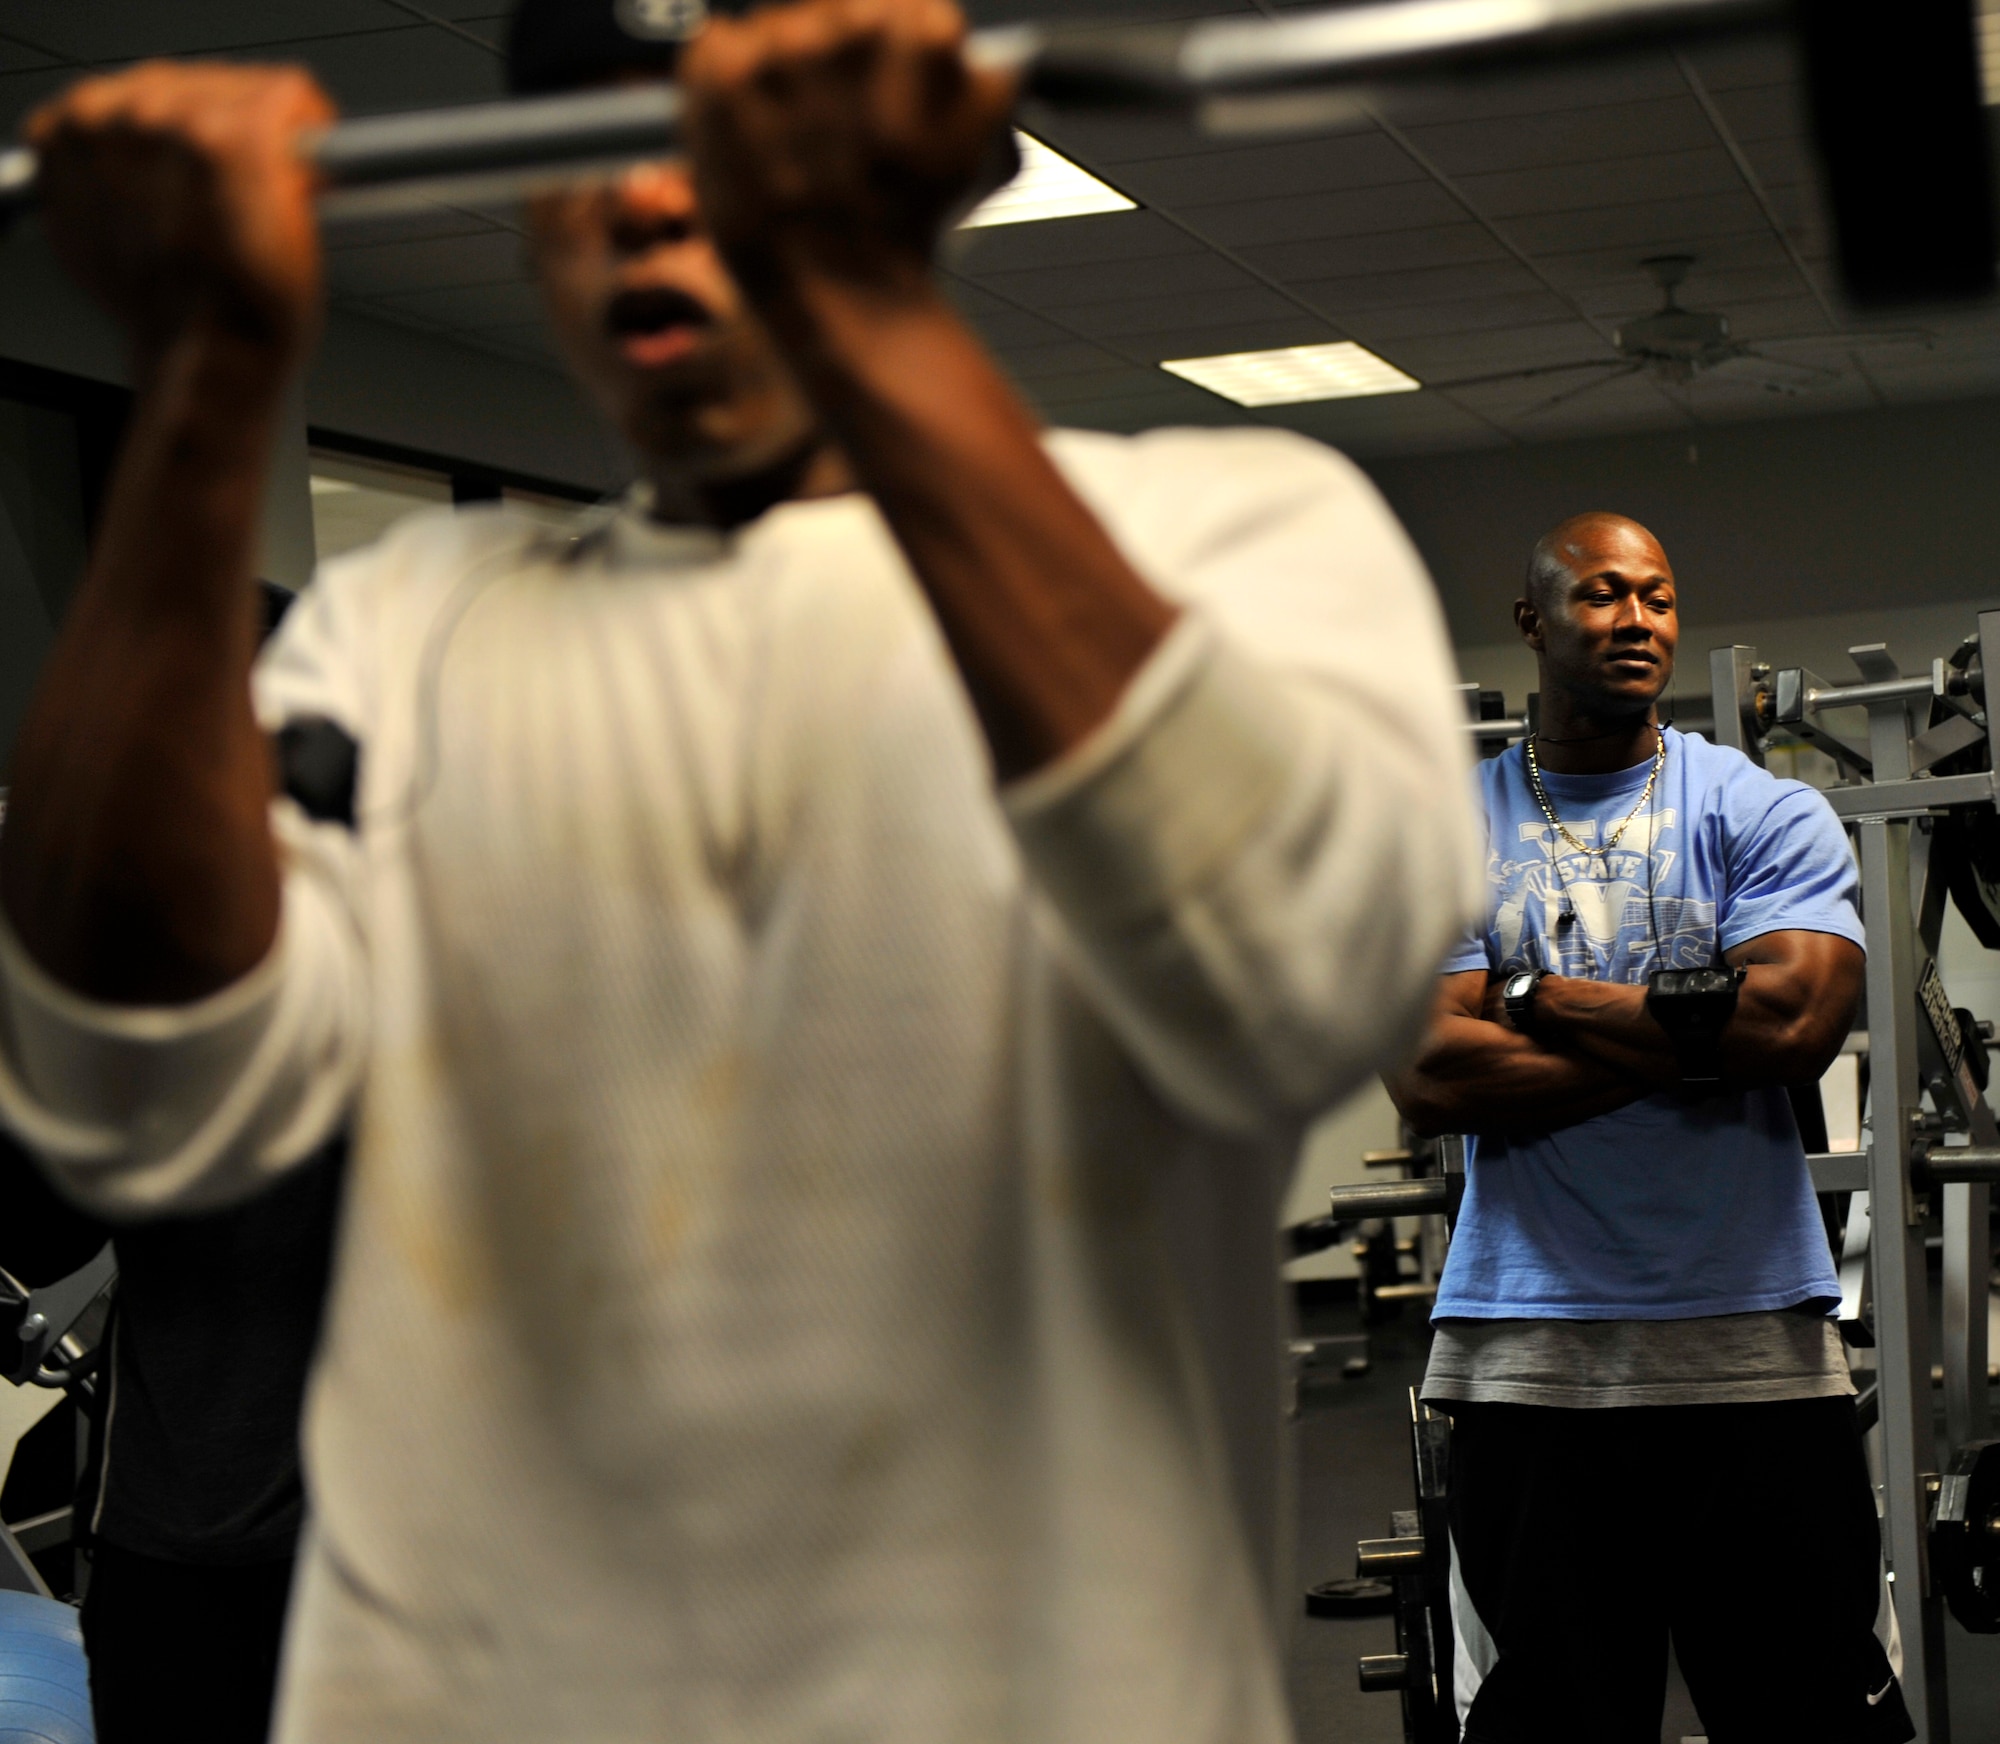 MOODY AIR FORCE BASE, Ga. -- Charles Gloster, Freedom I Fitness Center personal trainer, watches Senior Airman Rodney Bryant, 824th Security Forces Squadron fire team leader, perform a reverse triceps extension here April 1. Airman Bryant was preparing for the Supernatural Bodybuilding and Fitness competition held in Gainesville, Ga. (U.S. Air Force photo by Senior Airman Schelli Jones)